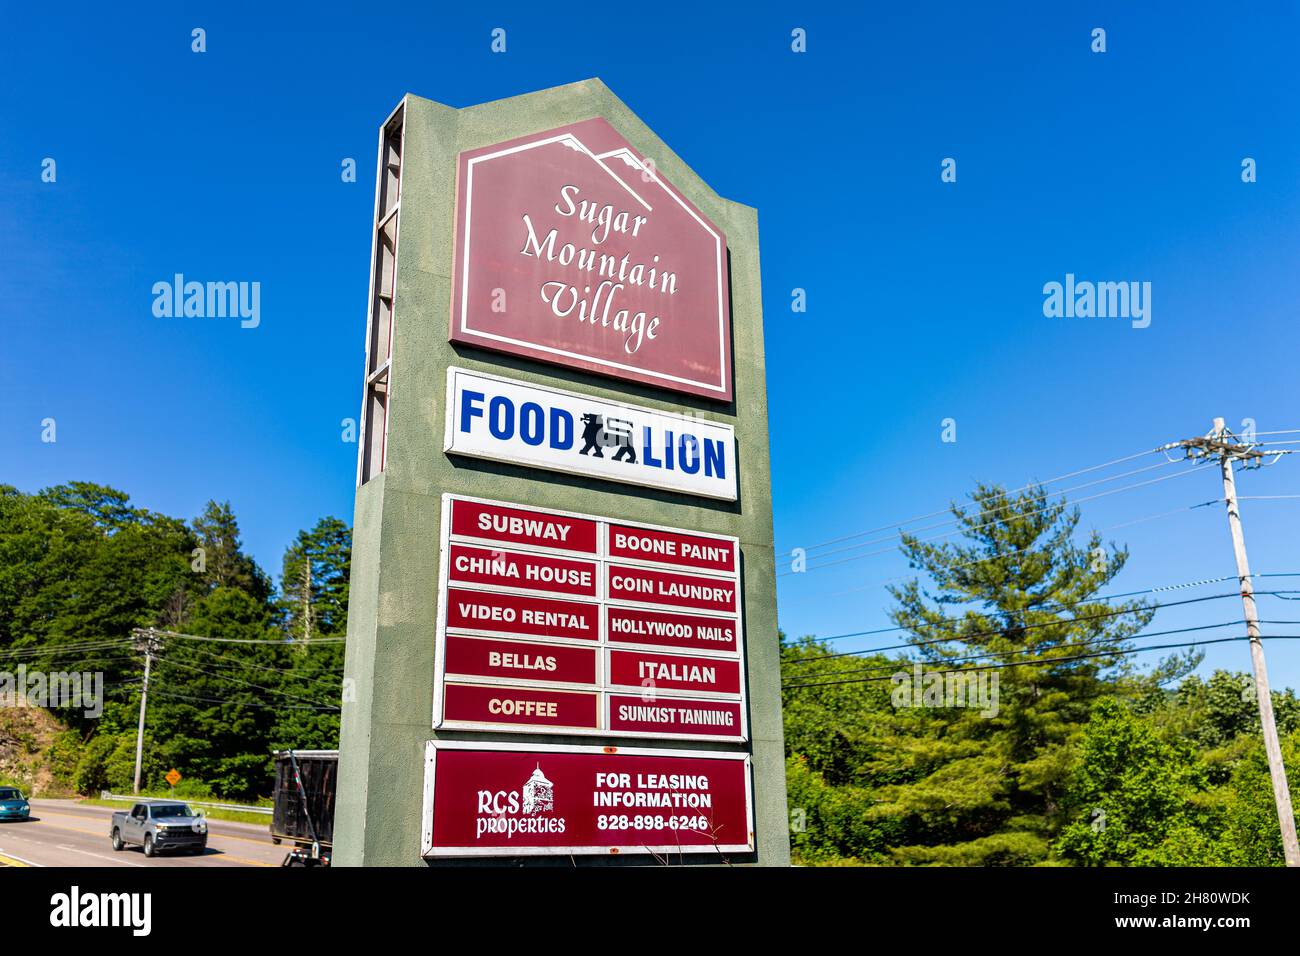 Banner Elk, USA - June 17, 2021: Local store strip mall sign for Food Lion grocery shop in NC North Carolina near Sugar Mountain Village and Subway, C Stock Photo